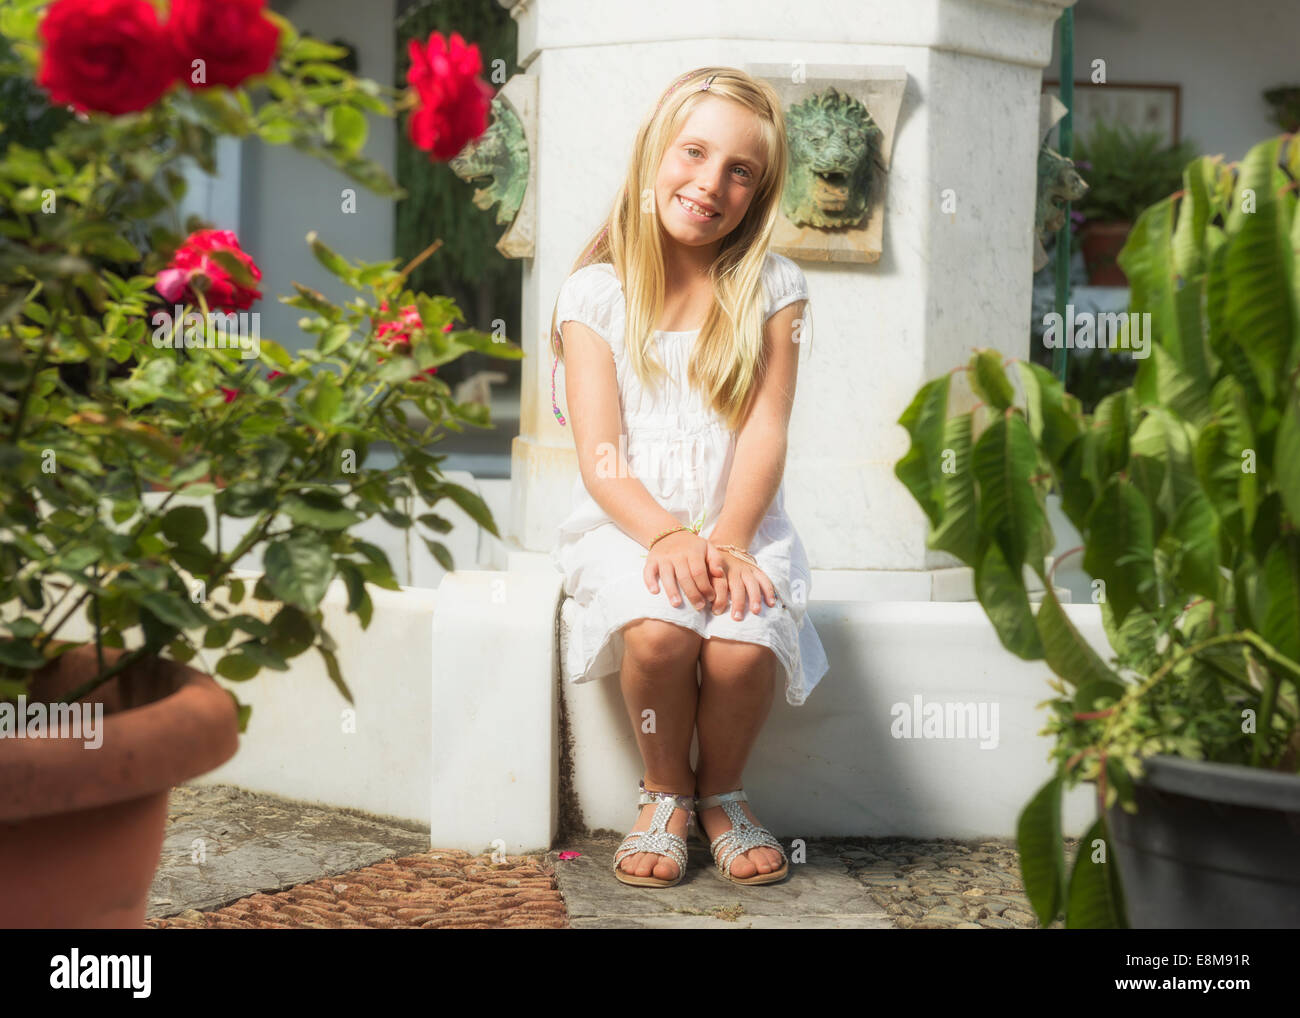 Young blond girl. Stock Photo